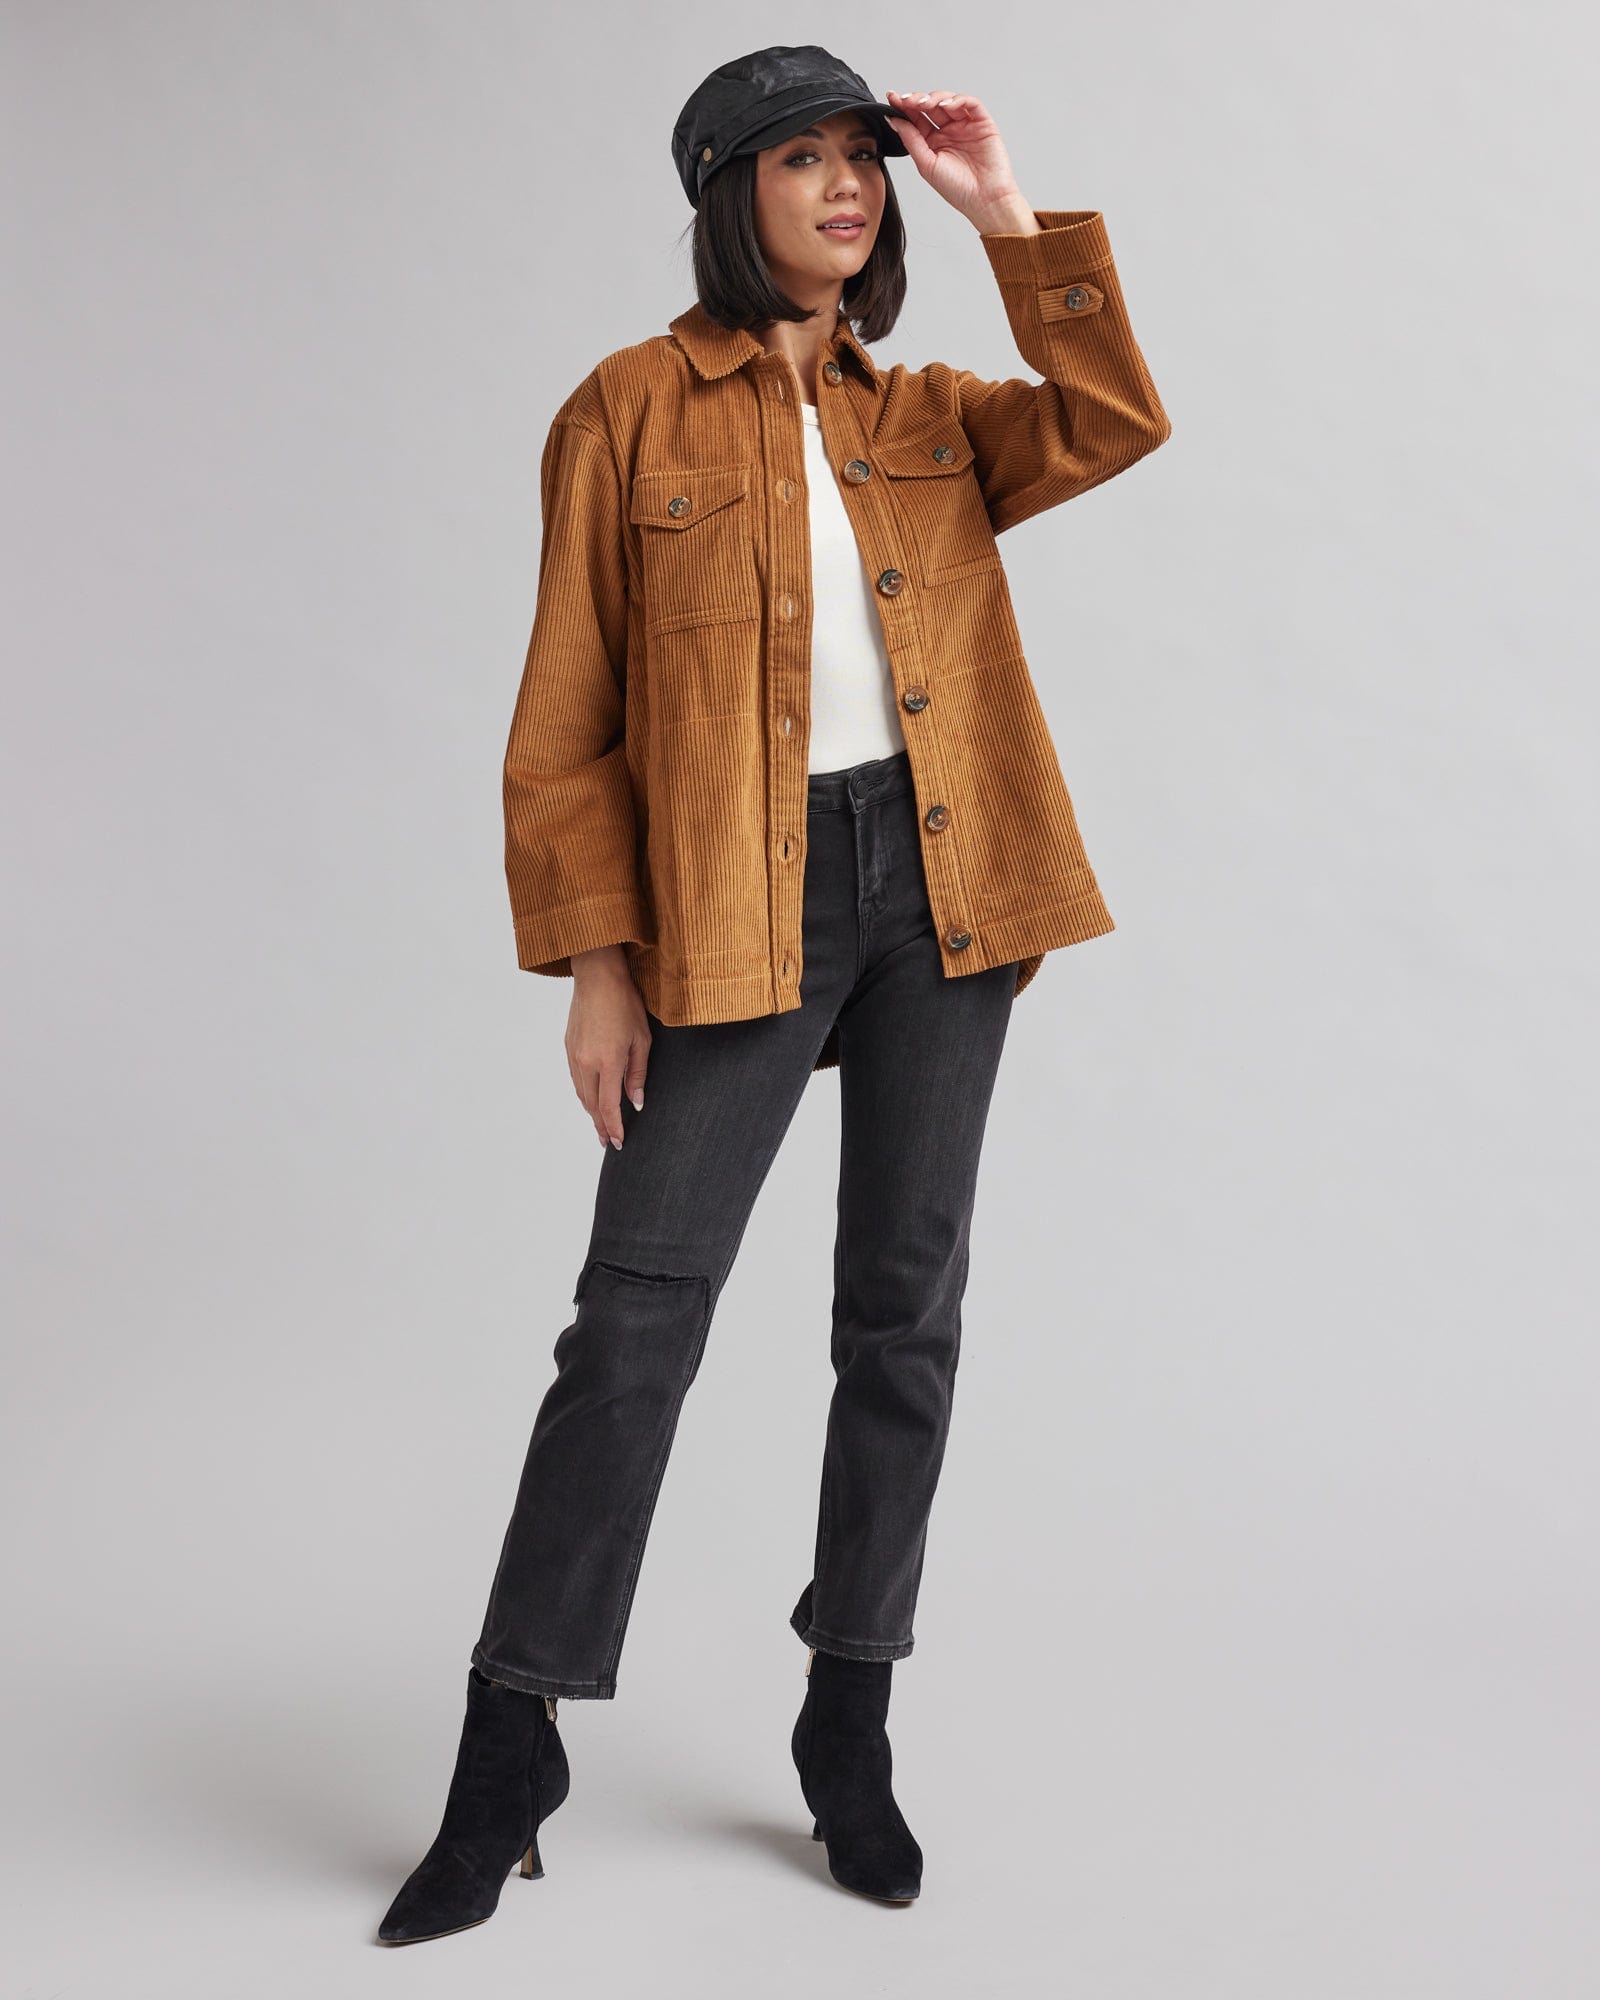 Woman in a brown corduroy jacket